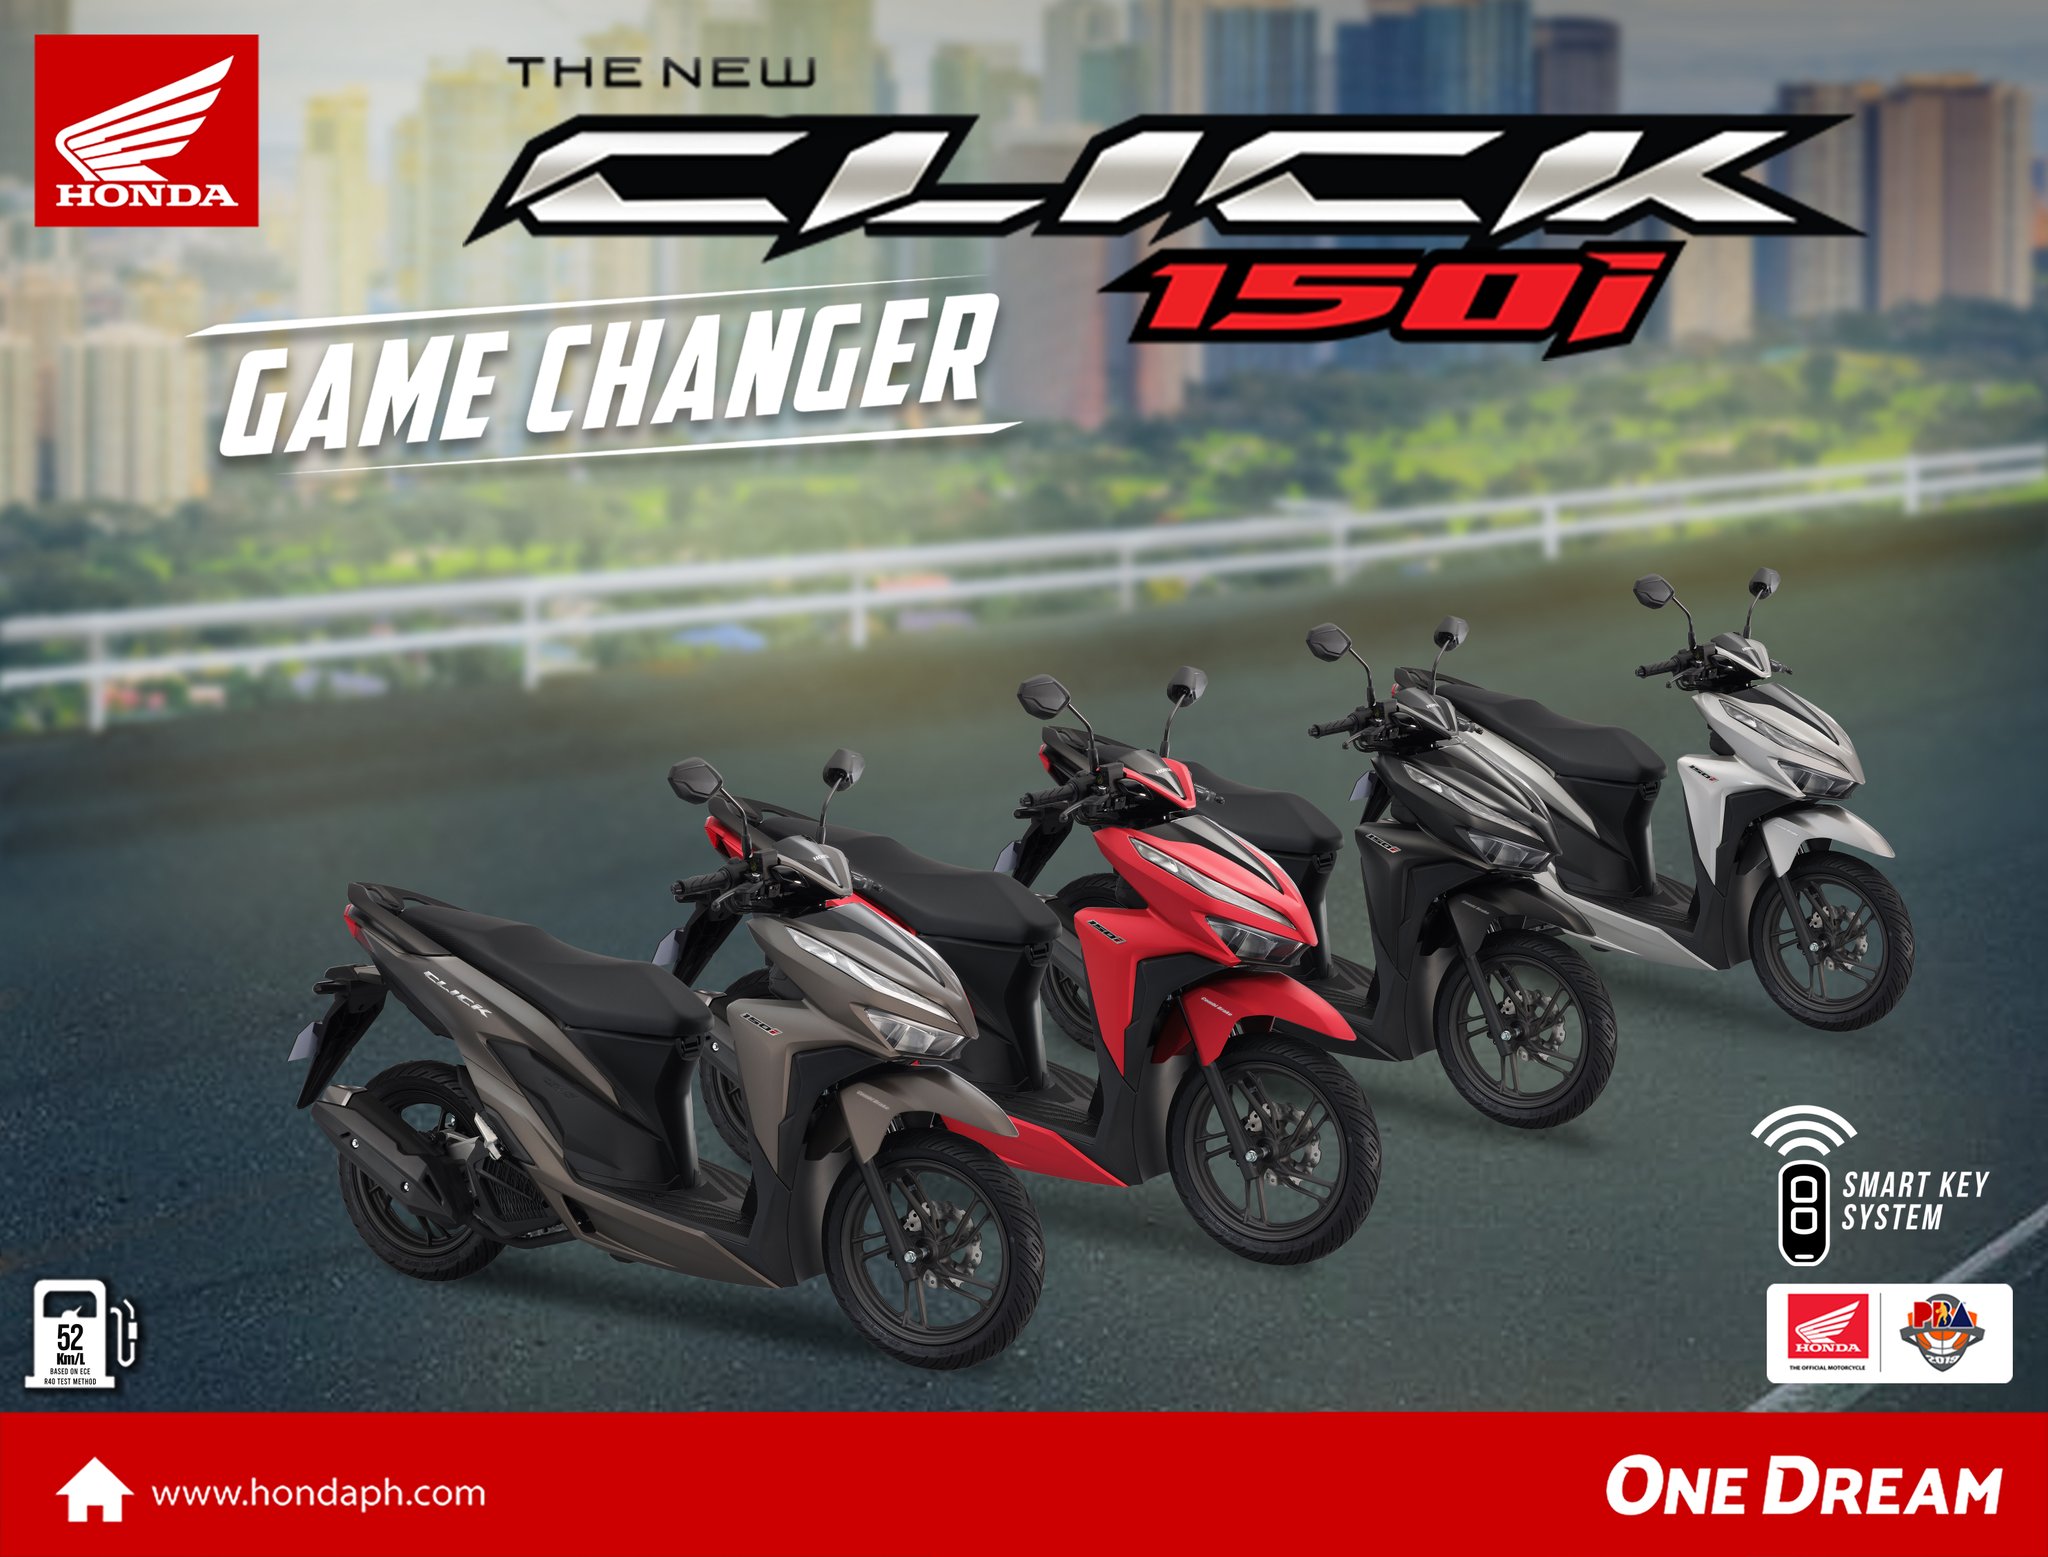 Honda Philippines Be In Style Not Only In Its Stylish Design But Also In Its Fashionable Colors Be A Gamechanger Now With The New Click150i Motomonday T Co Wpfxys4j